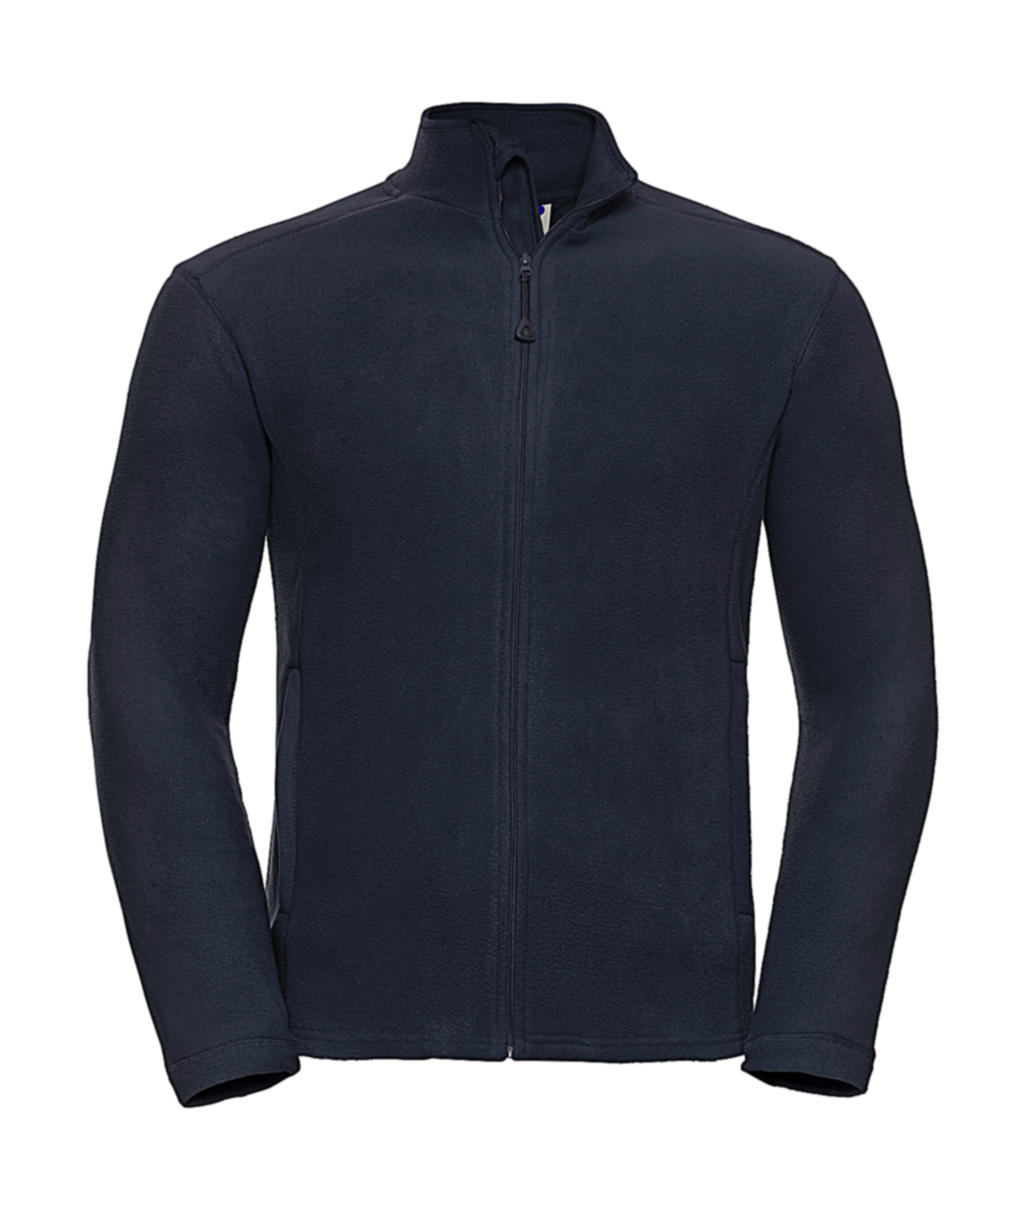  Mens Full Zip Microfleece in Farbe French Navy